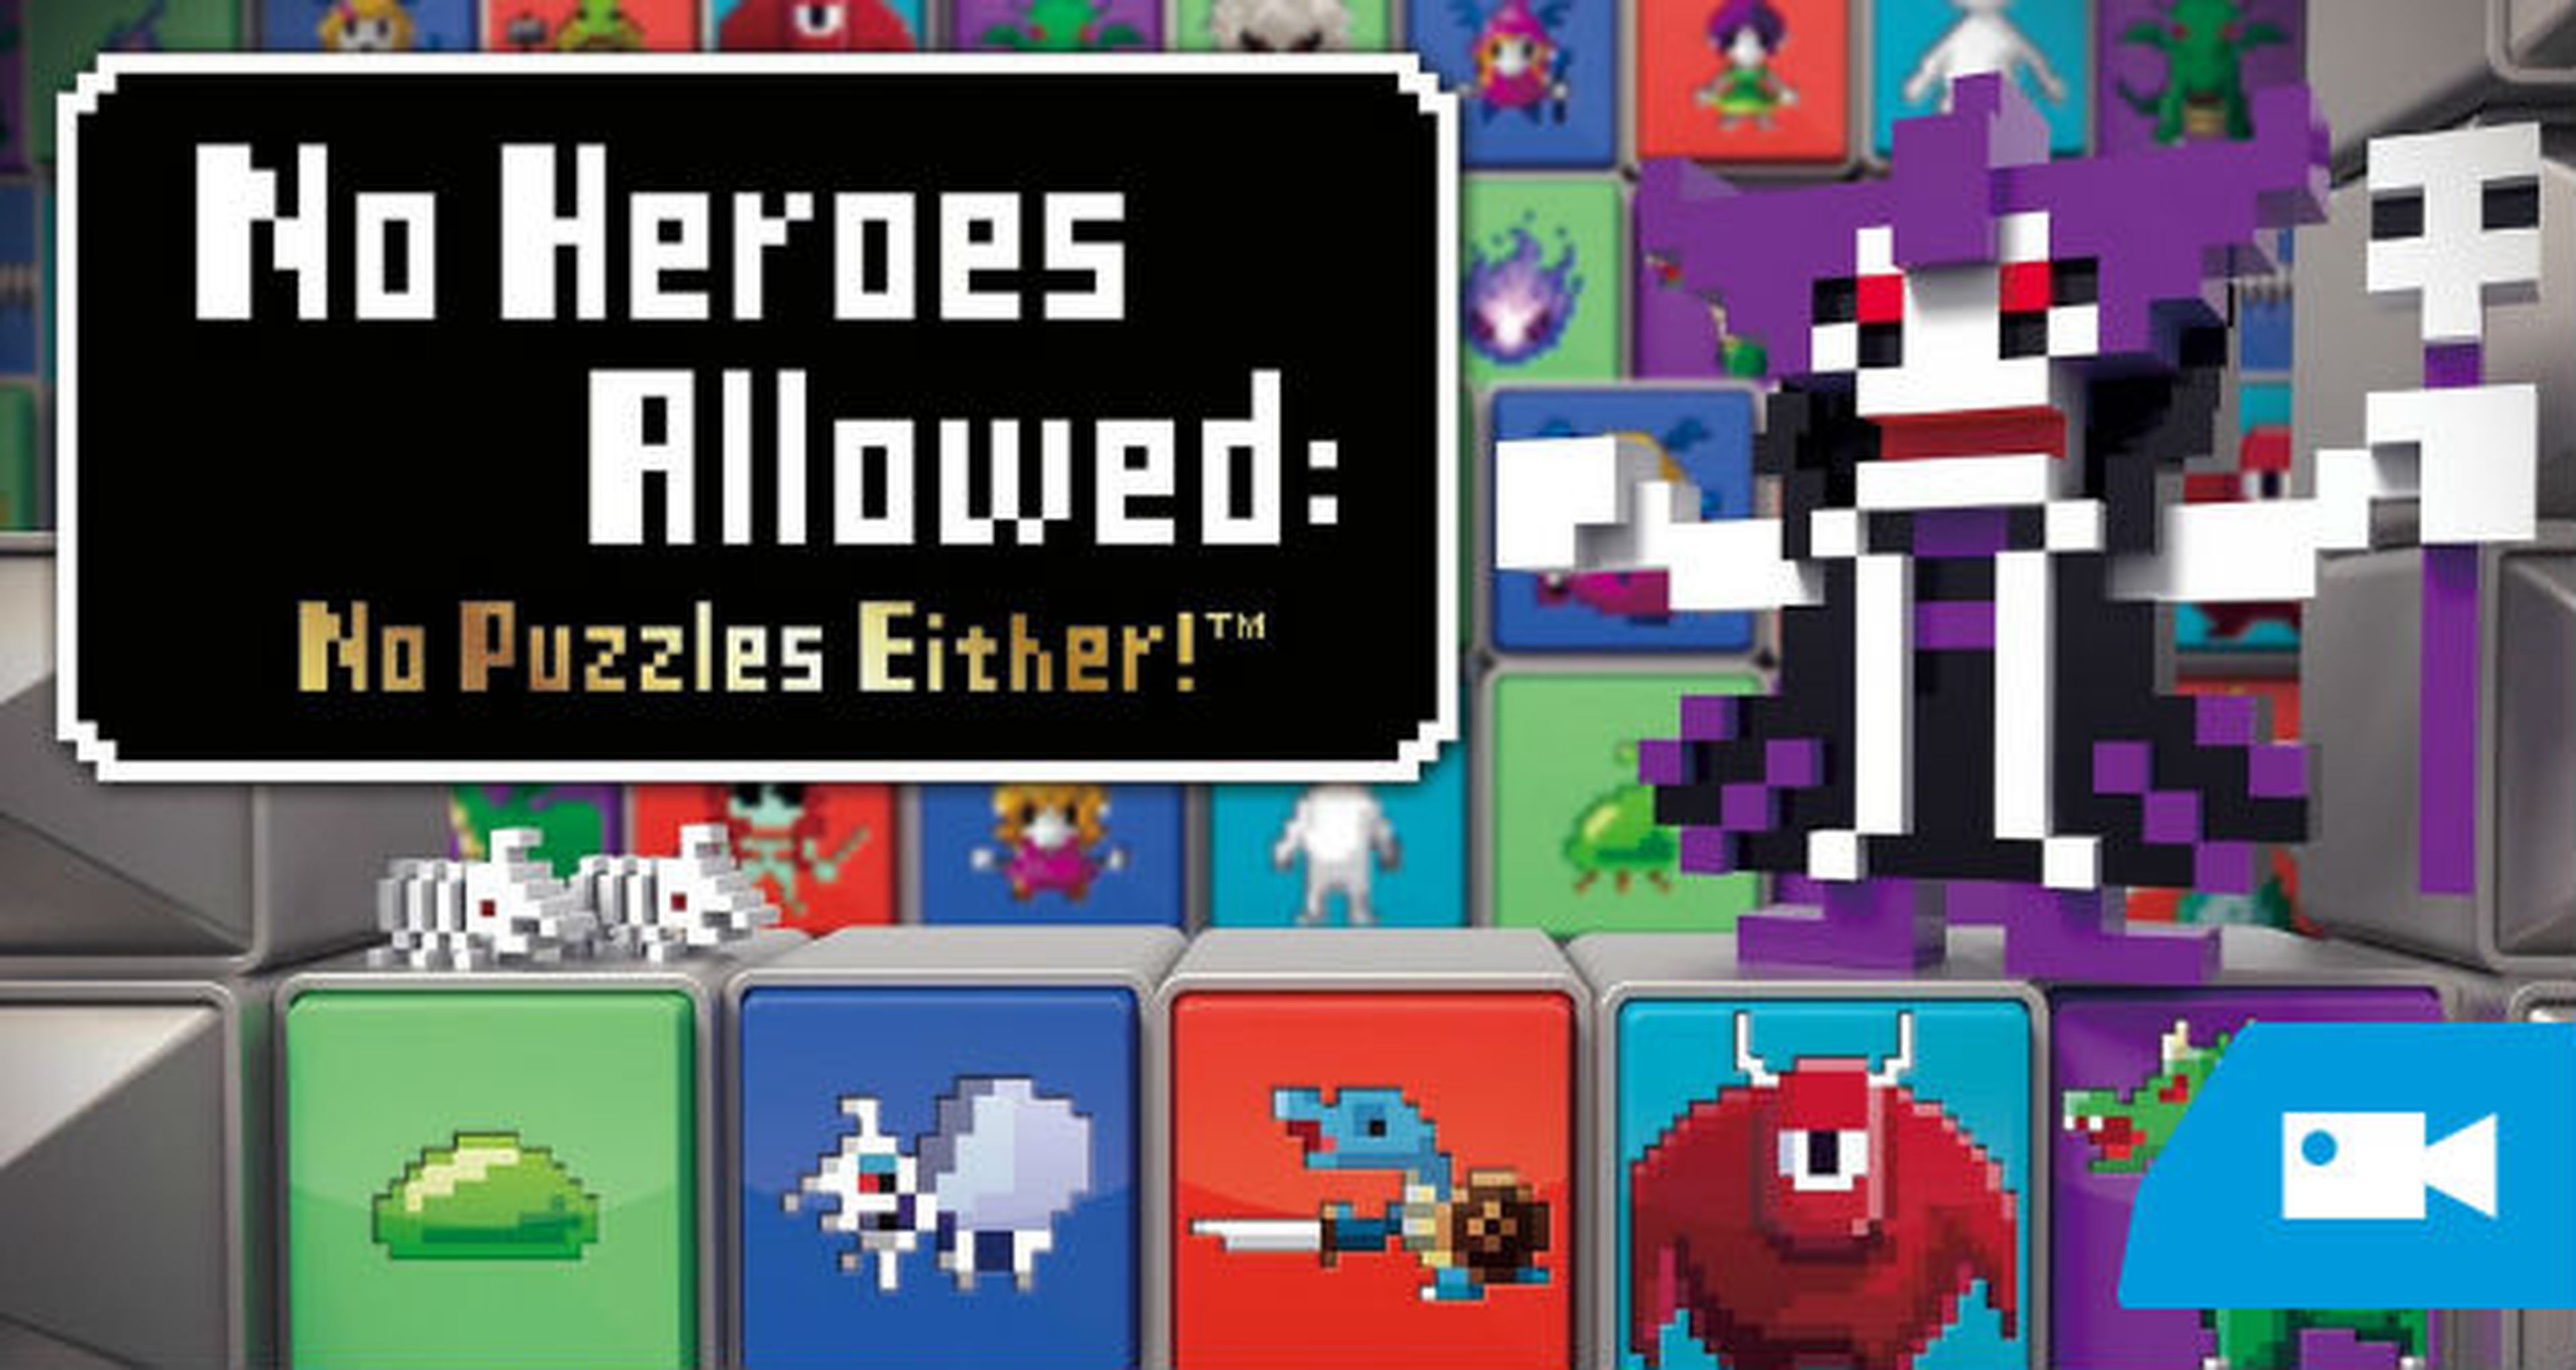 No Heroes Allowed: No Puzzles Either! llega a PS Vita